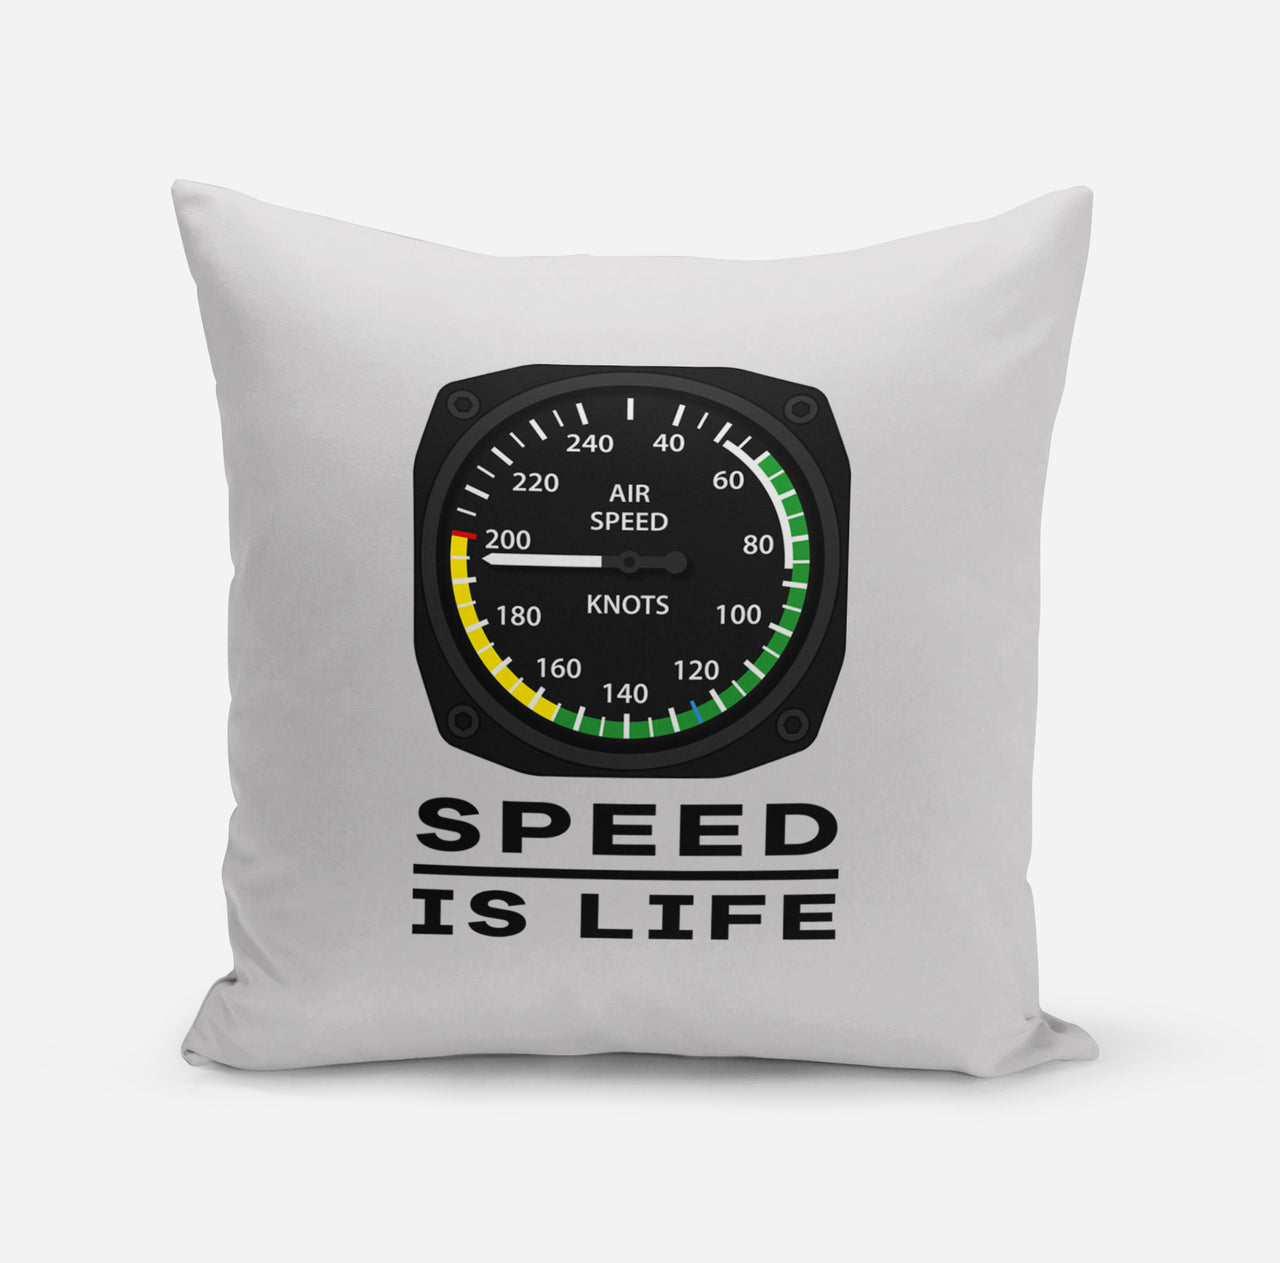 Speed Is Life Designed Pillows